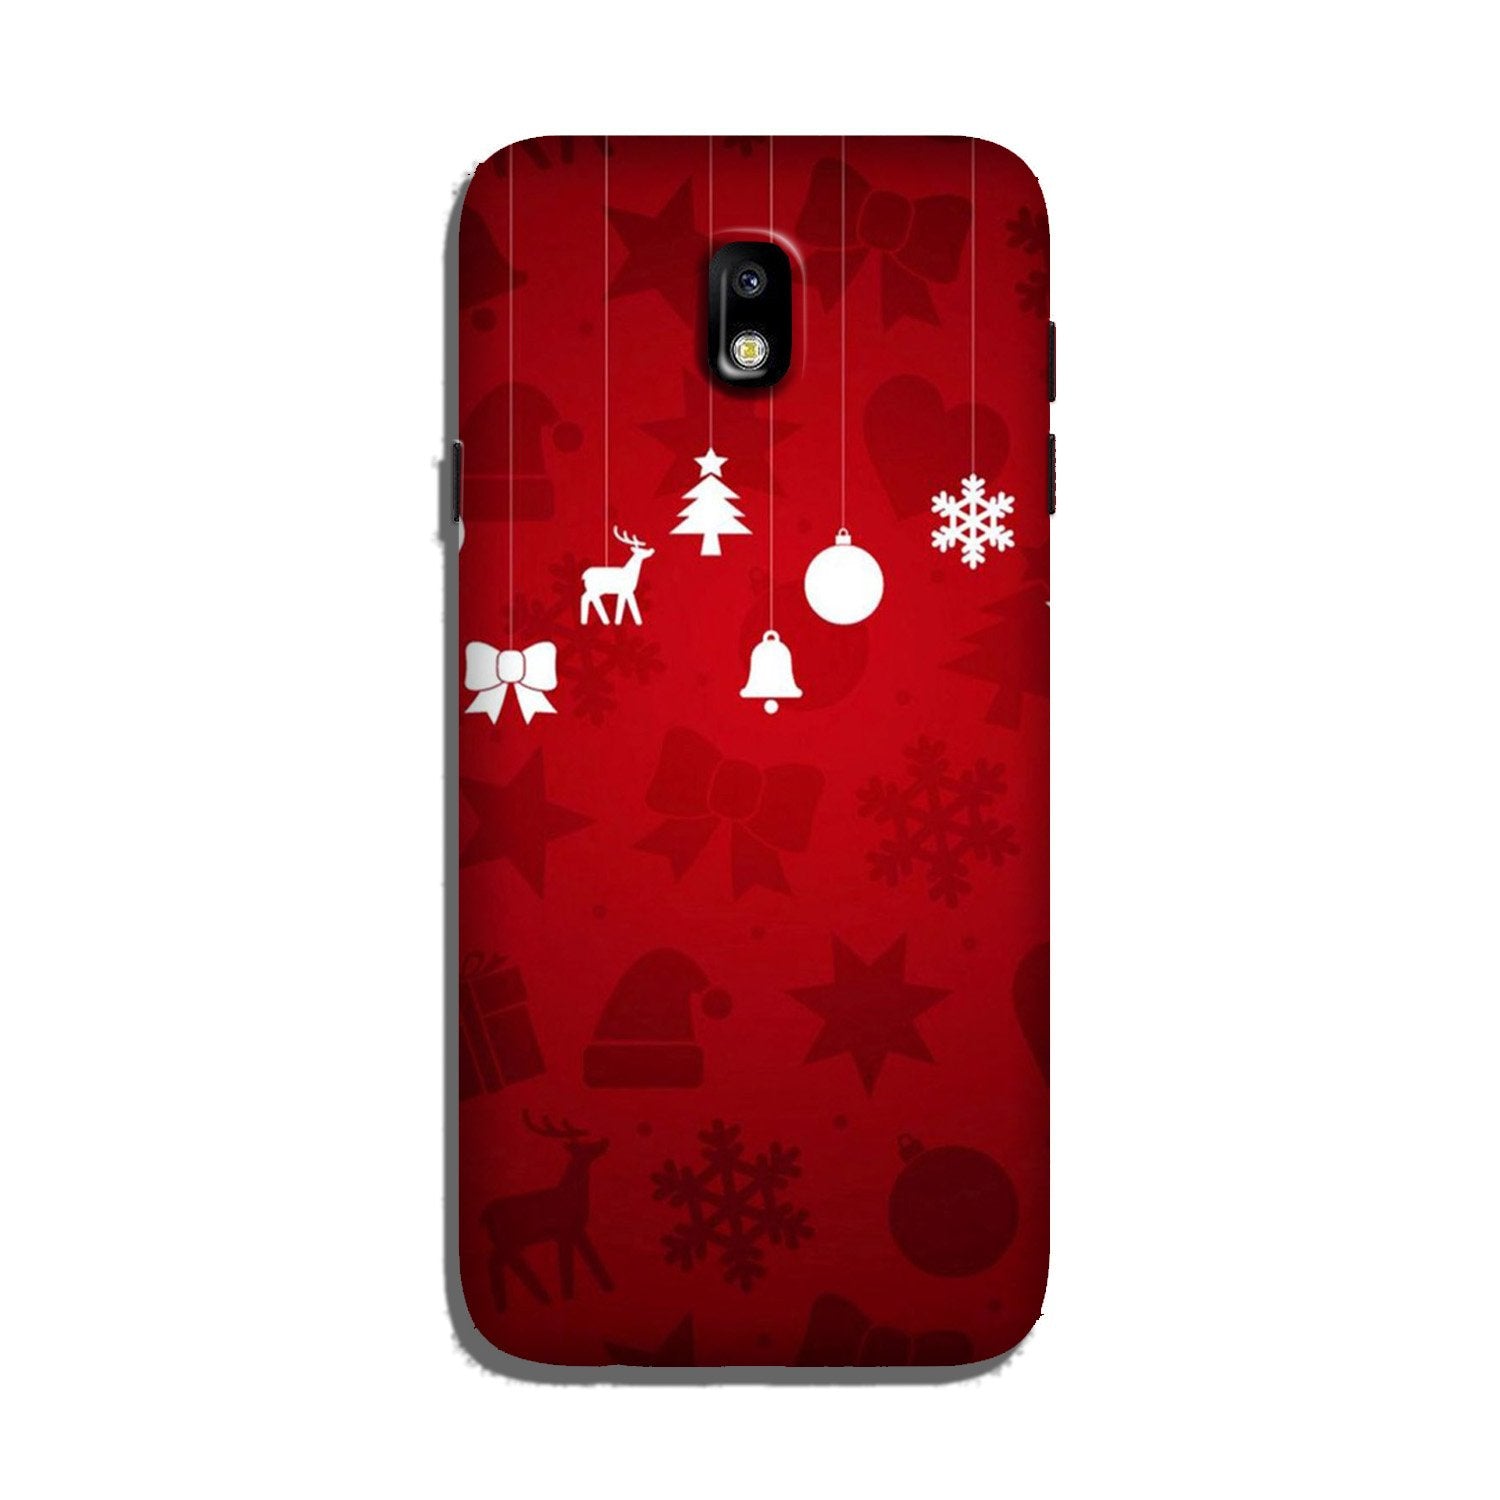 Christmas Case for Galaxy J7 Pro